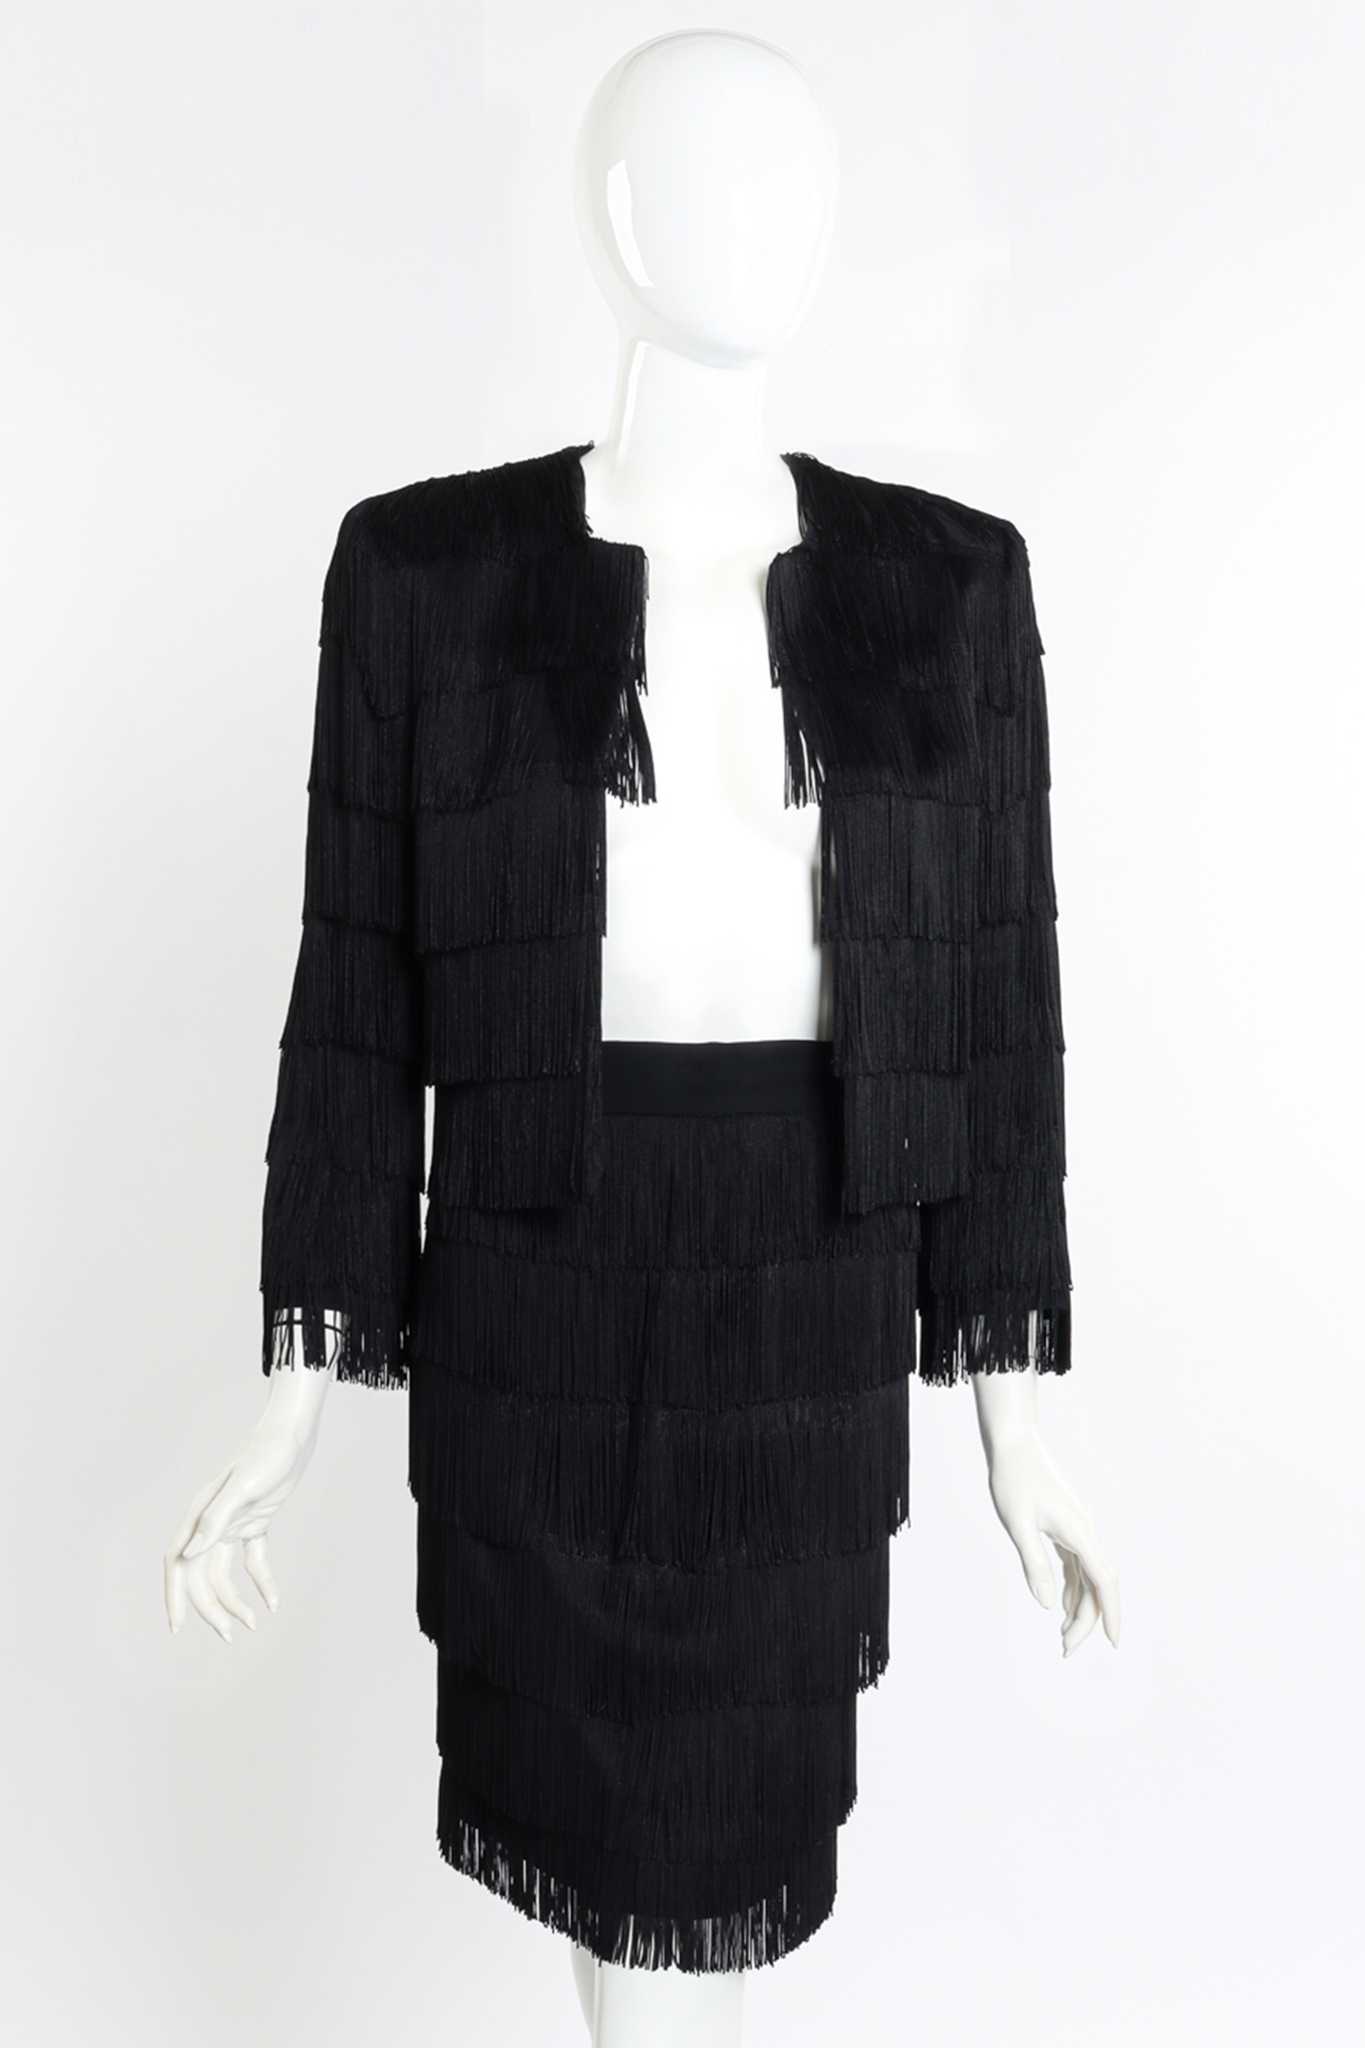 Vintage Moschino Couture Fringe Jacket and Skirt Set front on mannequin closeup @recessla